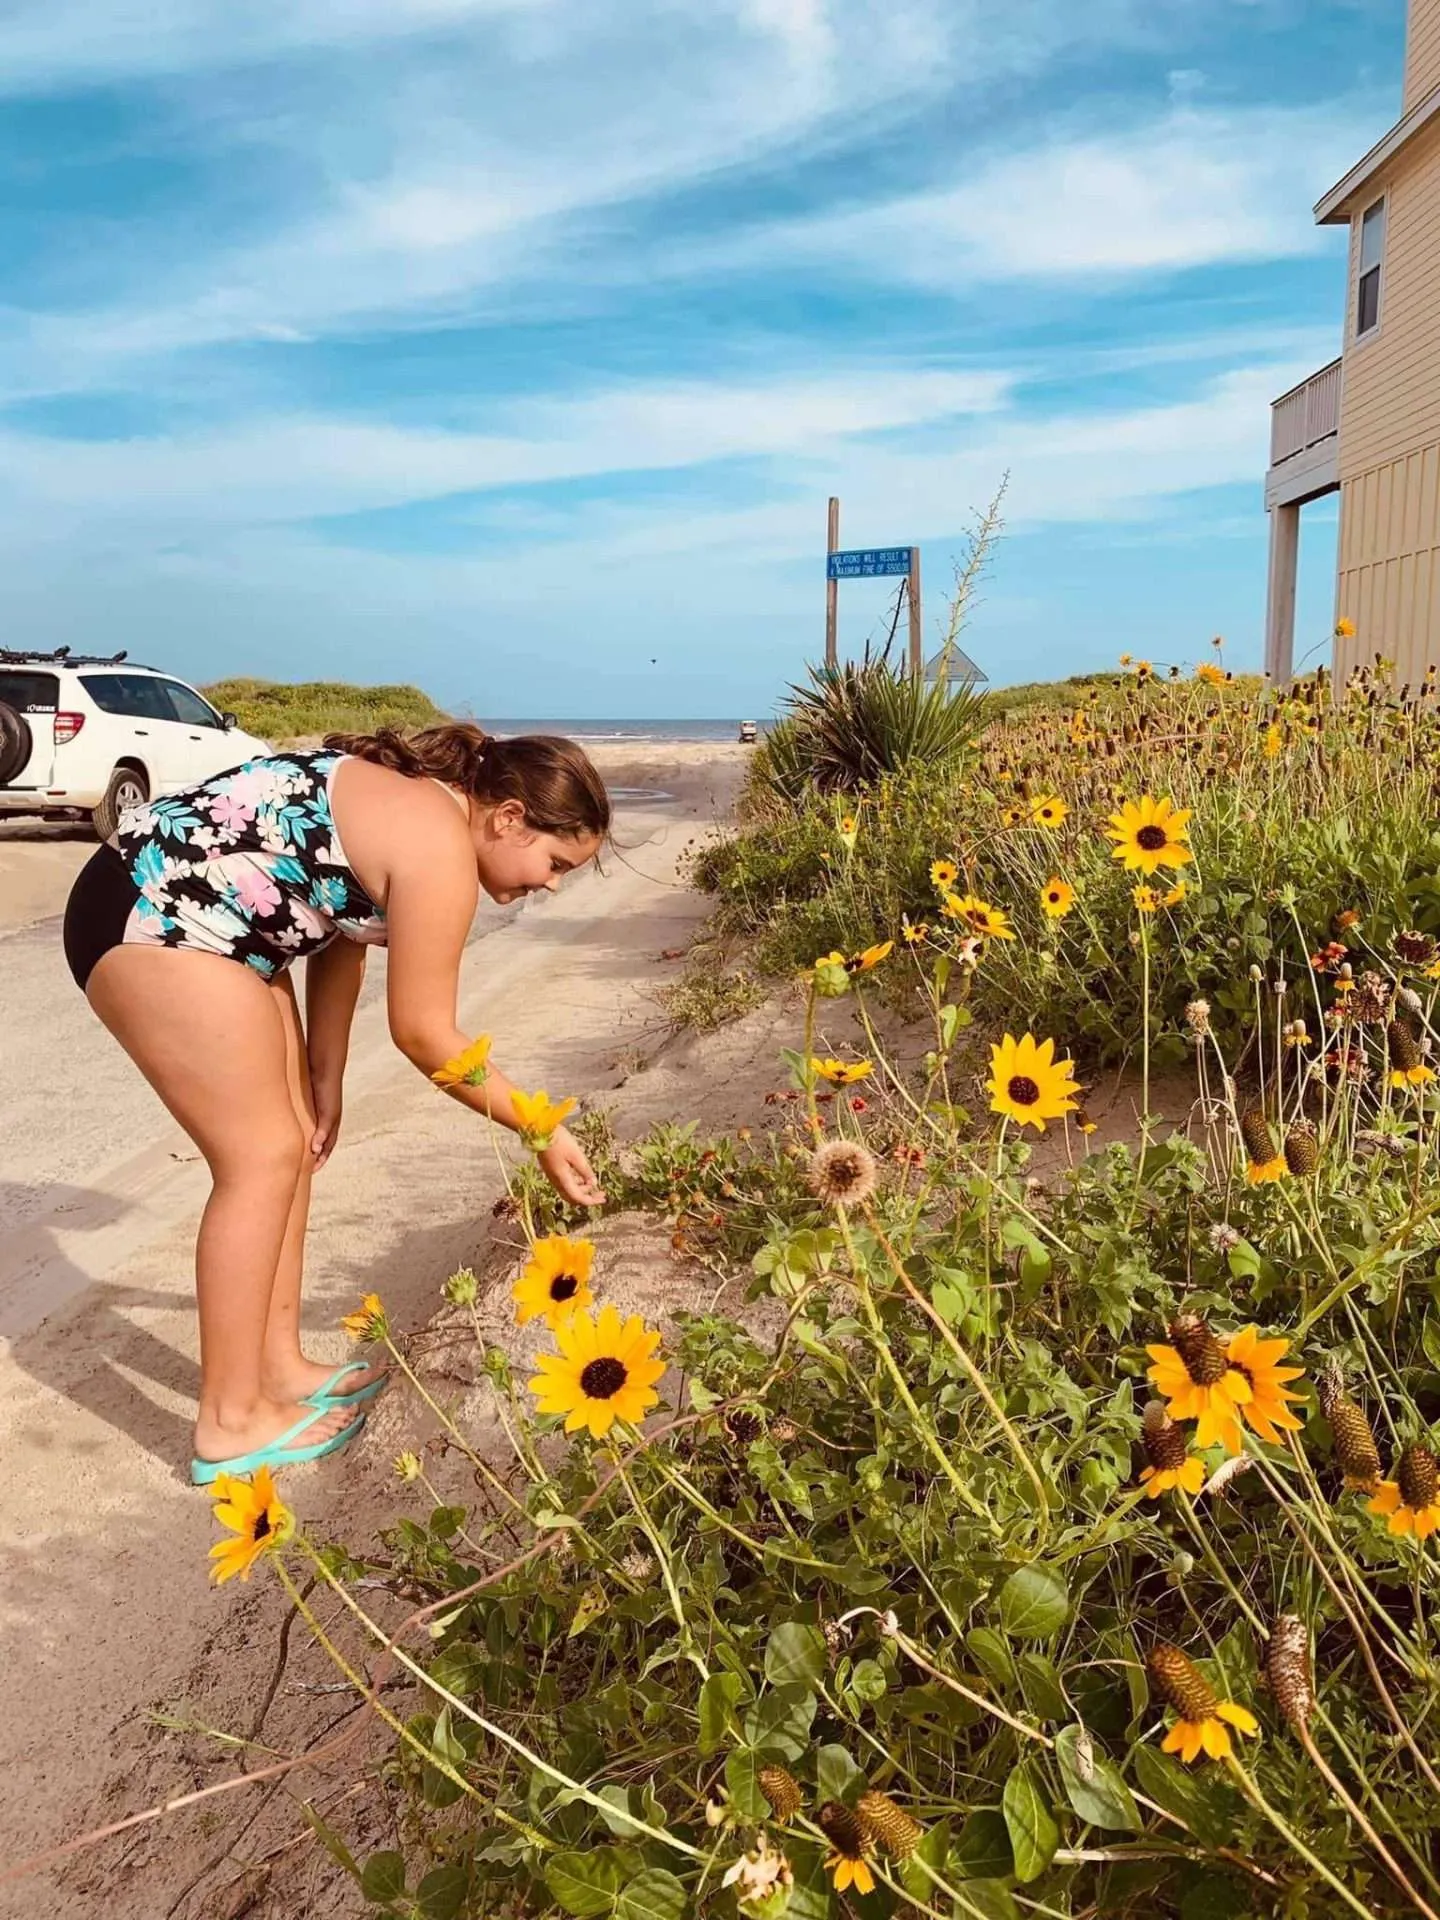 Taking the time to stop and smell the flowers at the beach in Galveston, Texas.